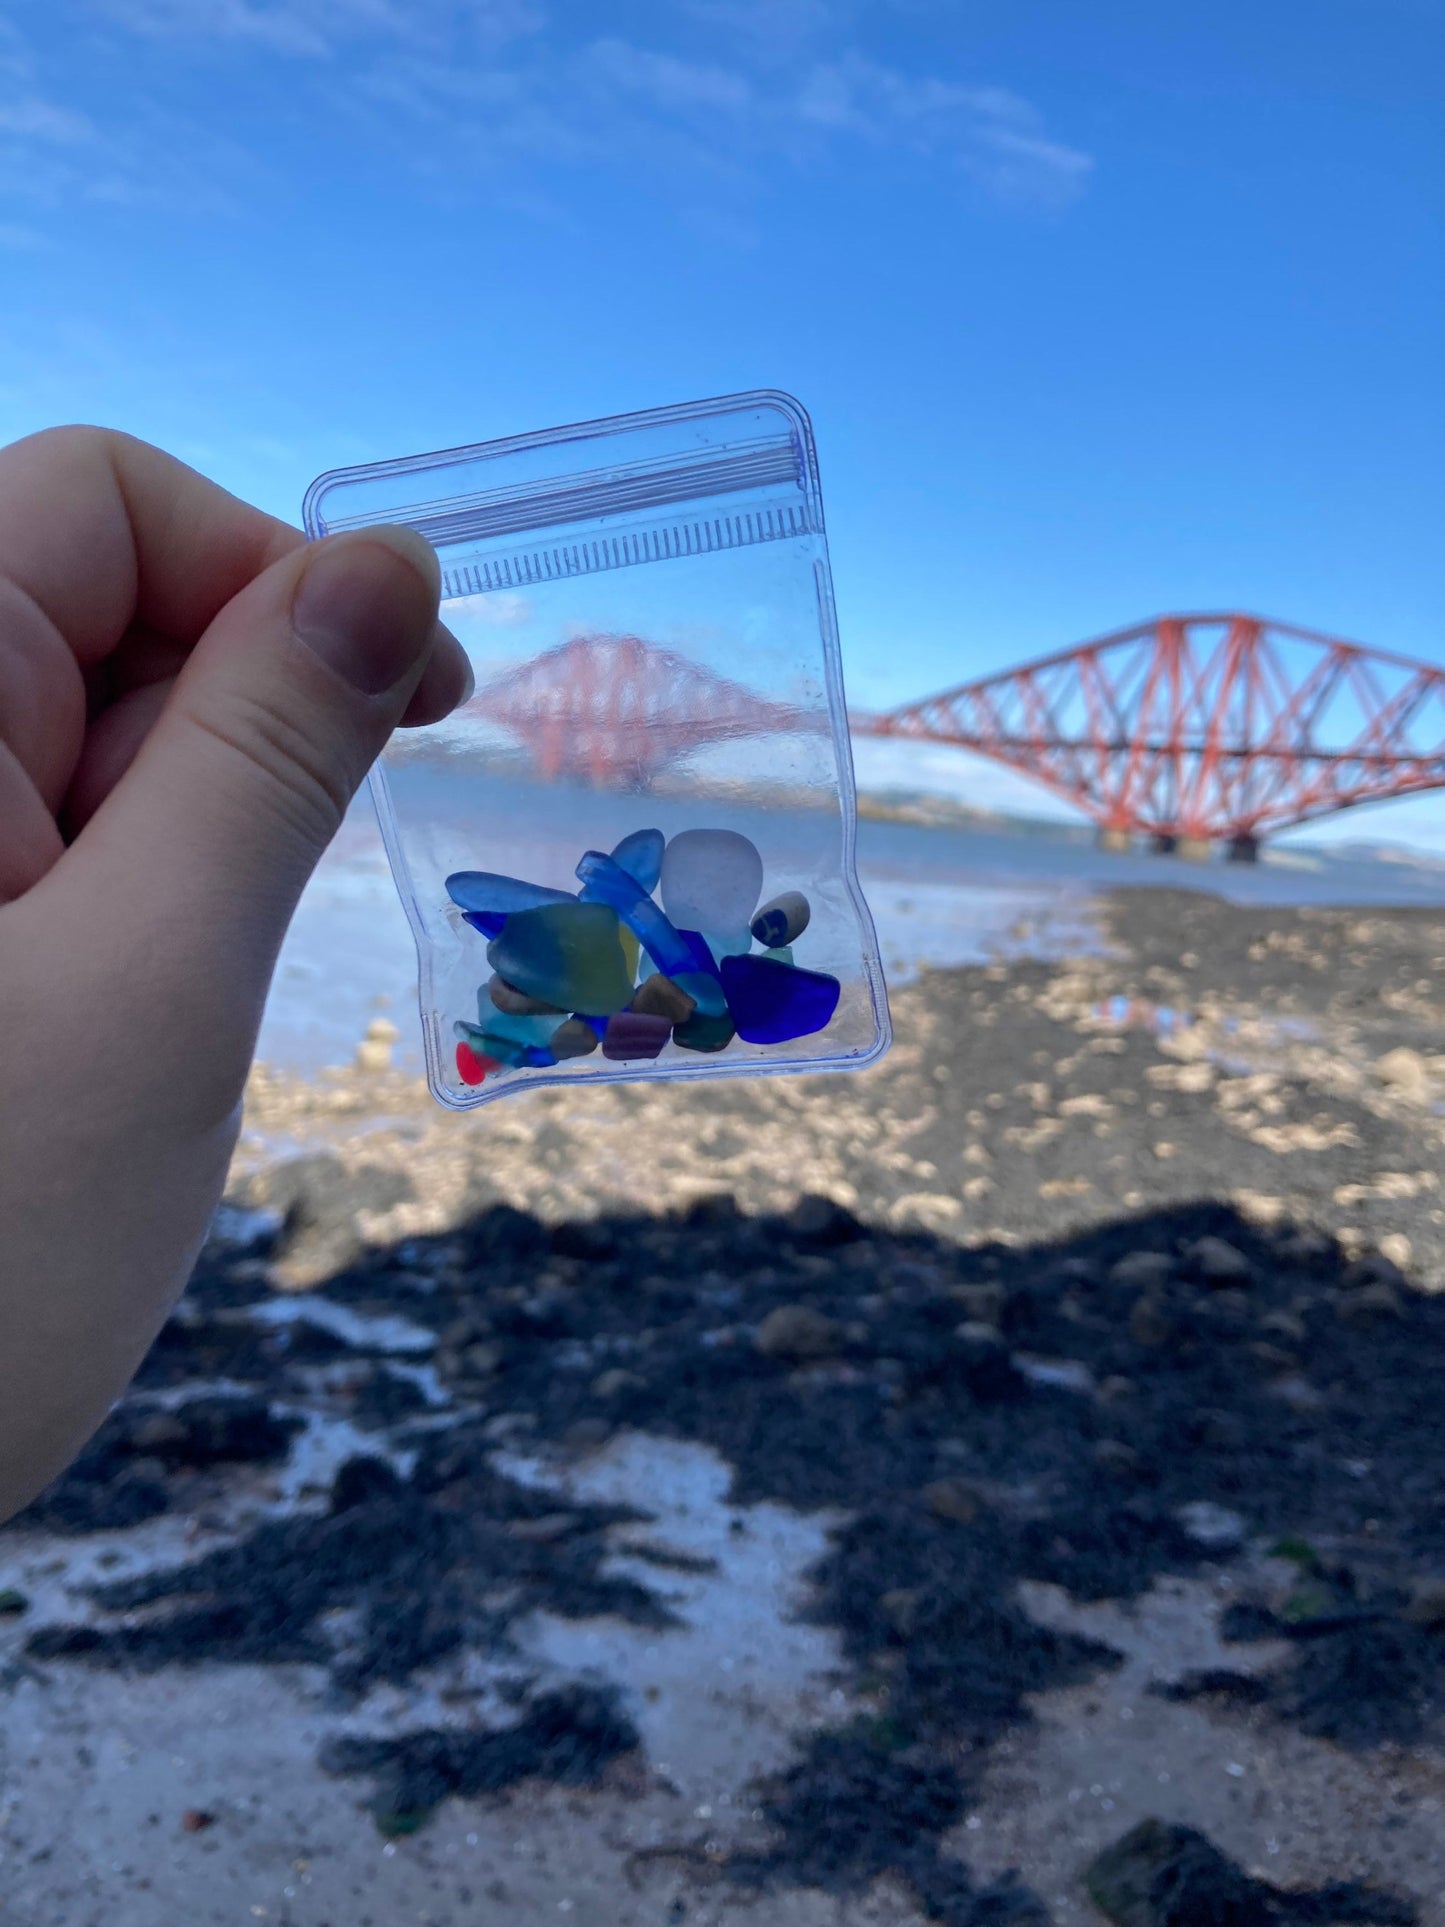 Blue sea glass/beach glass collected from South Queensferry beach Scotland in 2022/23